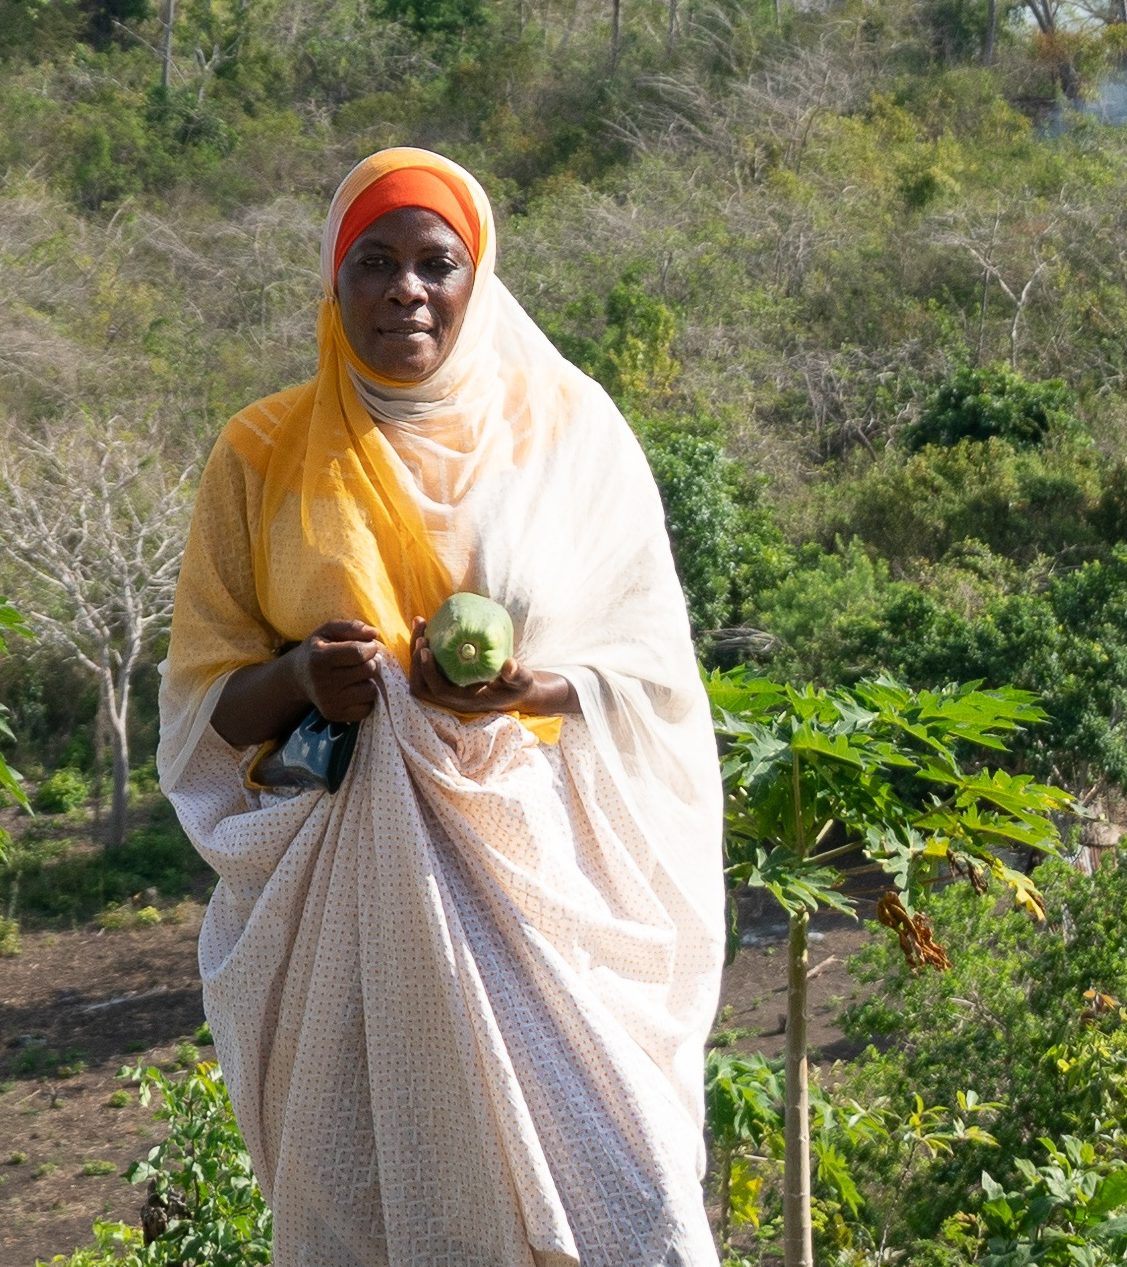 Realizing Land Rights to Deliver for Rural Women